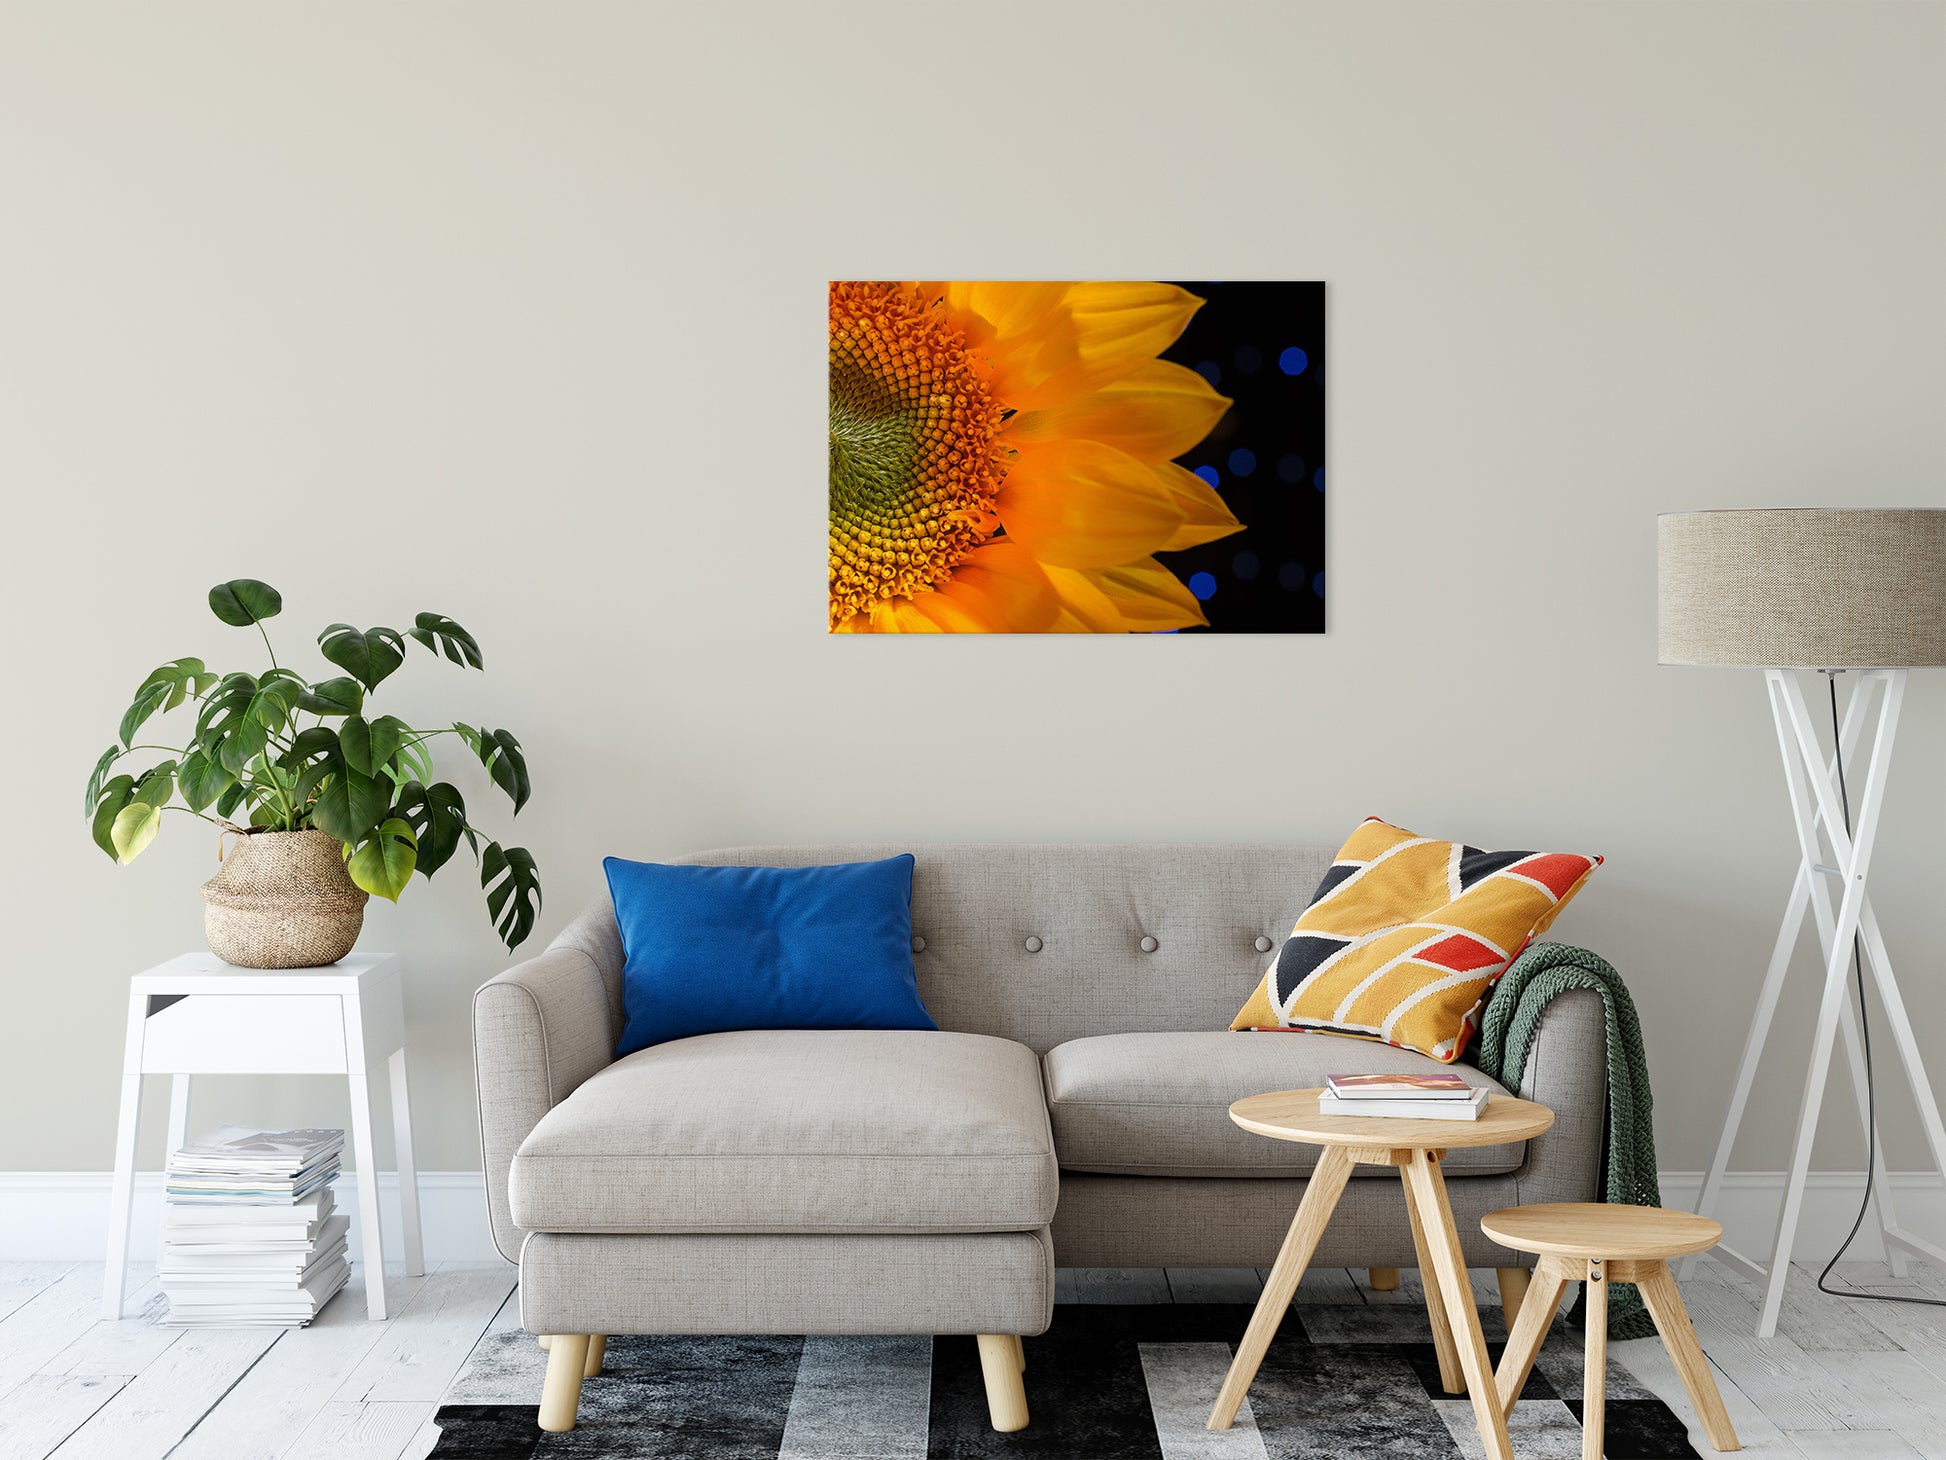 Close-up Sunflower Nature / Floral Photo Fine Art Canvas Wall Art Prints 24" x 36" - PIPAFINEART